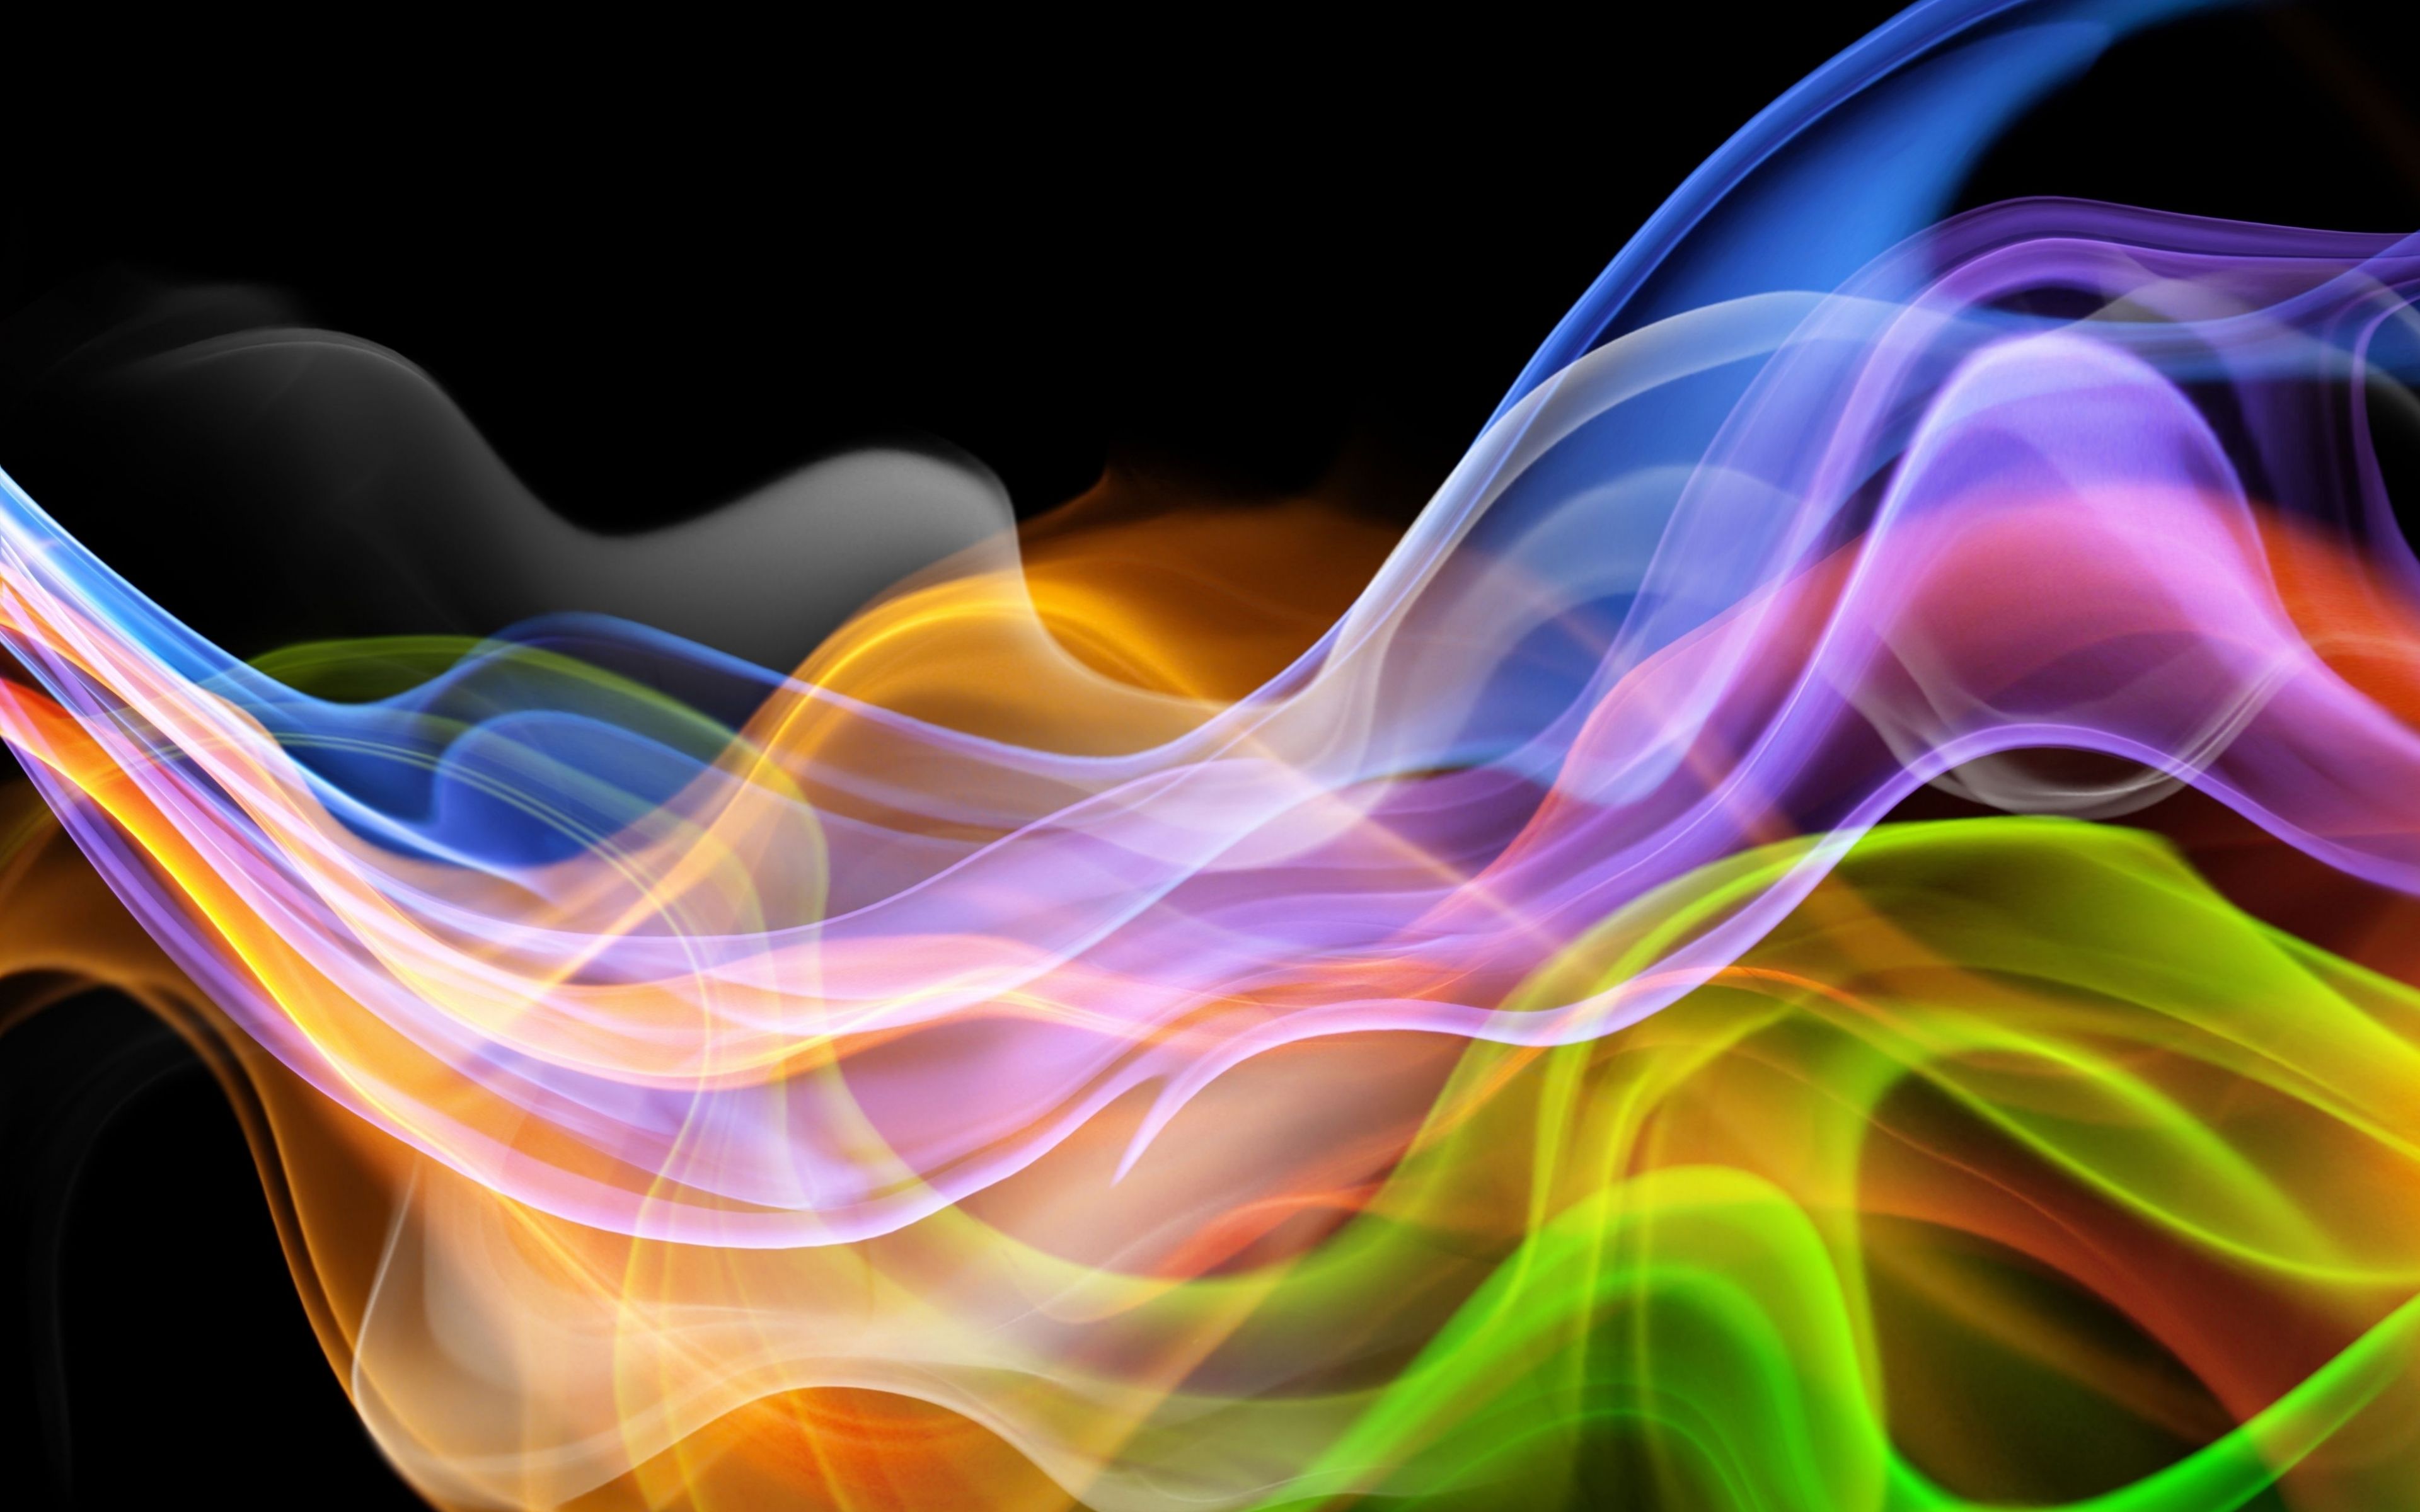 Download 3840x2400 wallpaper colorful smoke, waves, abstraction, 4k, ultra HD 16: widescreen, 3840x2400 HD image, background, 25816